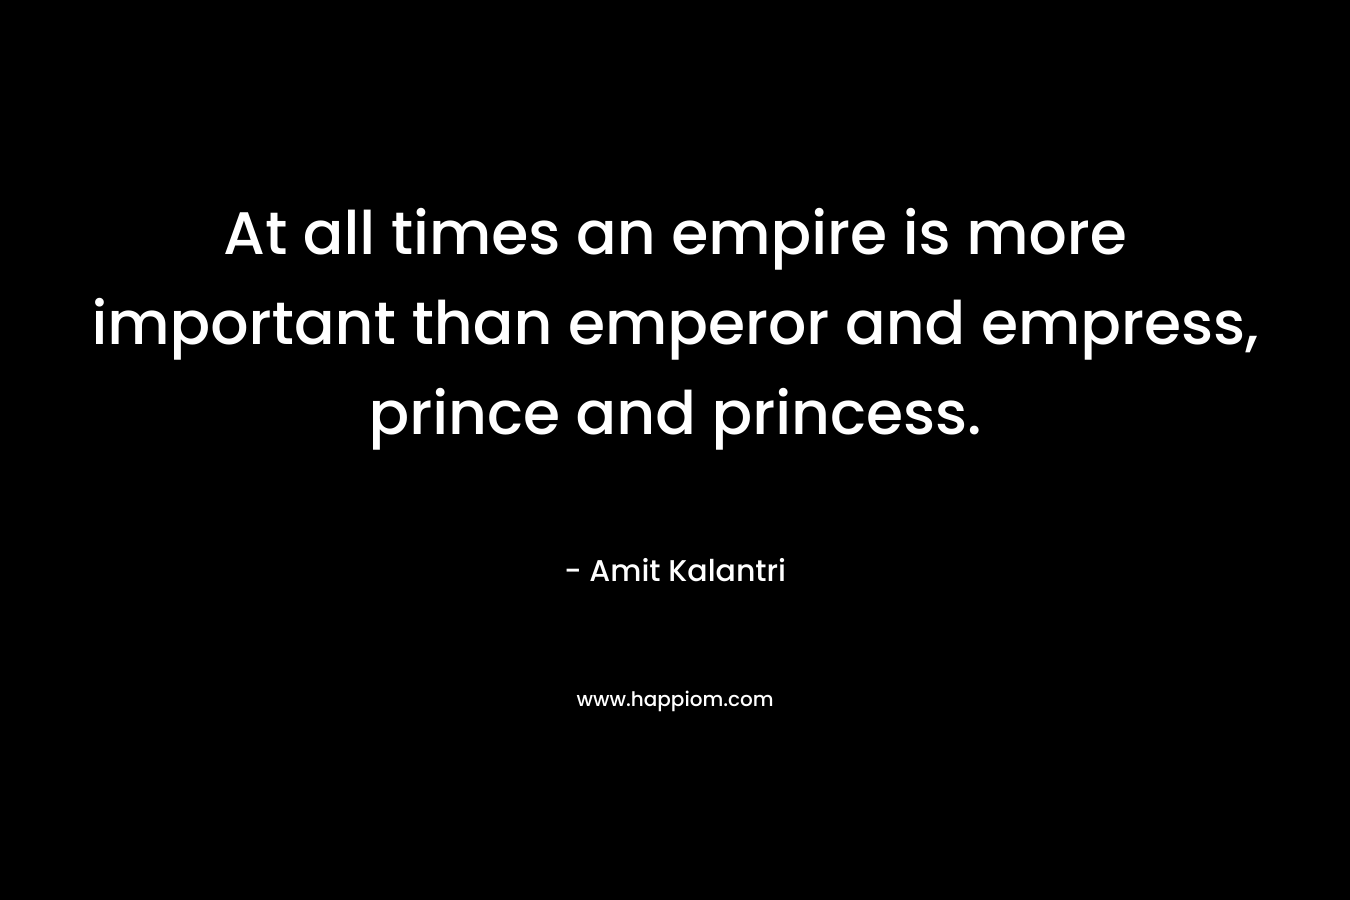 At all times an empire is more important than emperor and empress, prince and princess. – Amit Kalantri